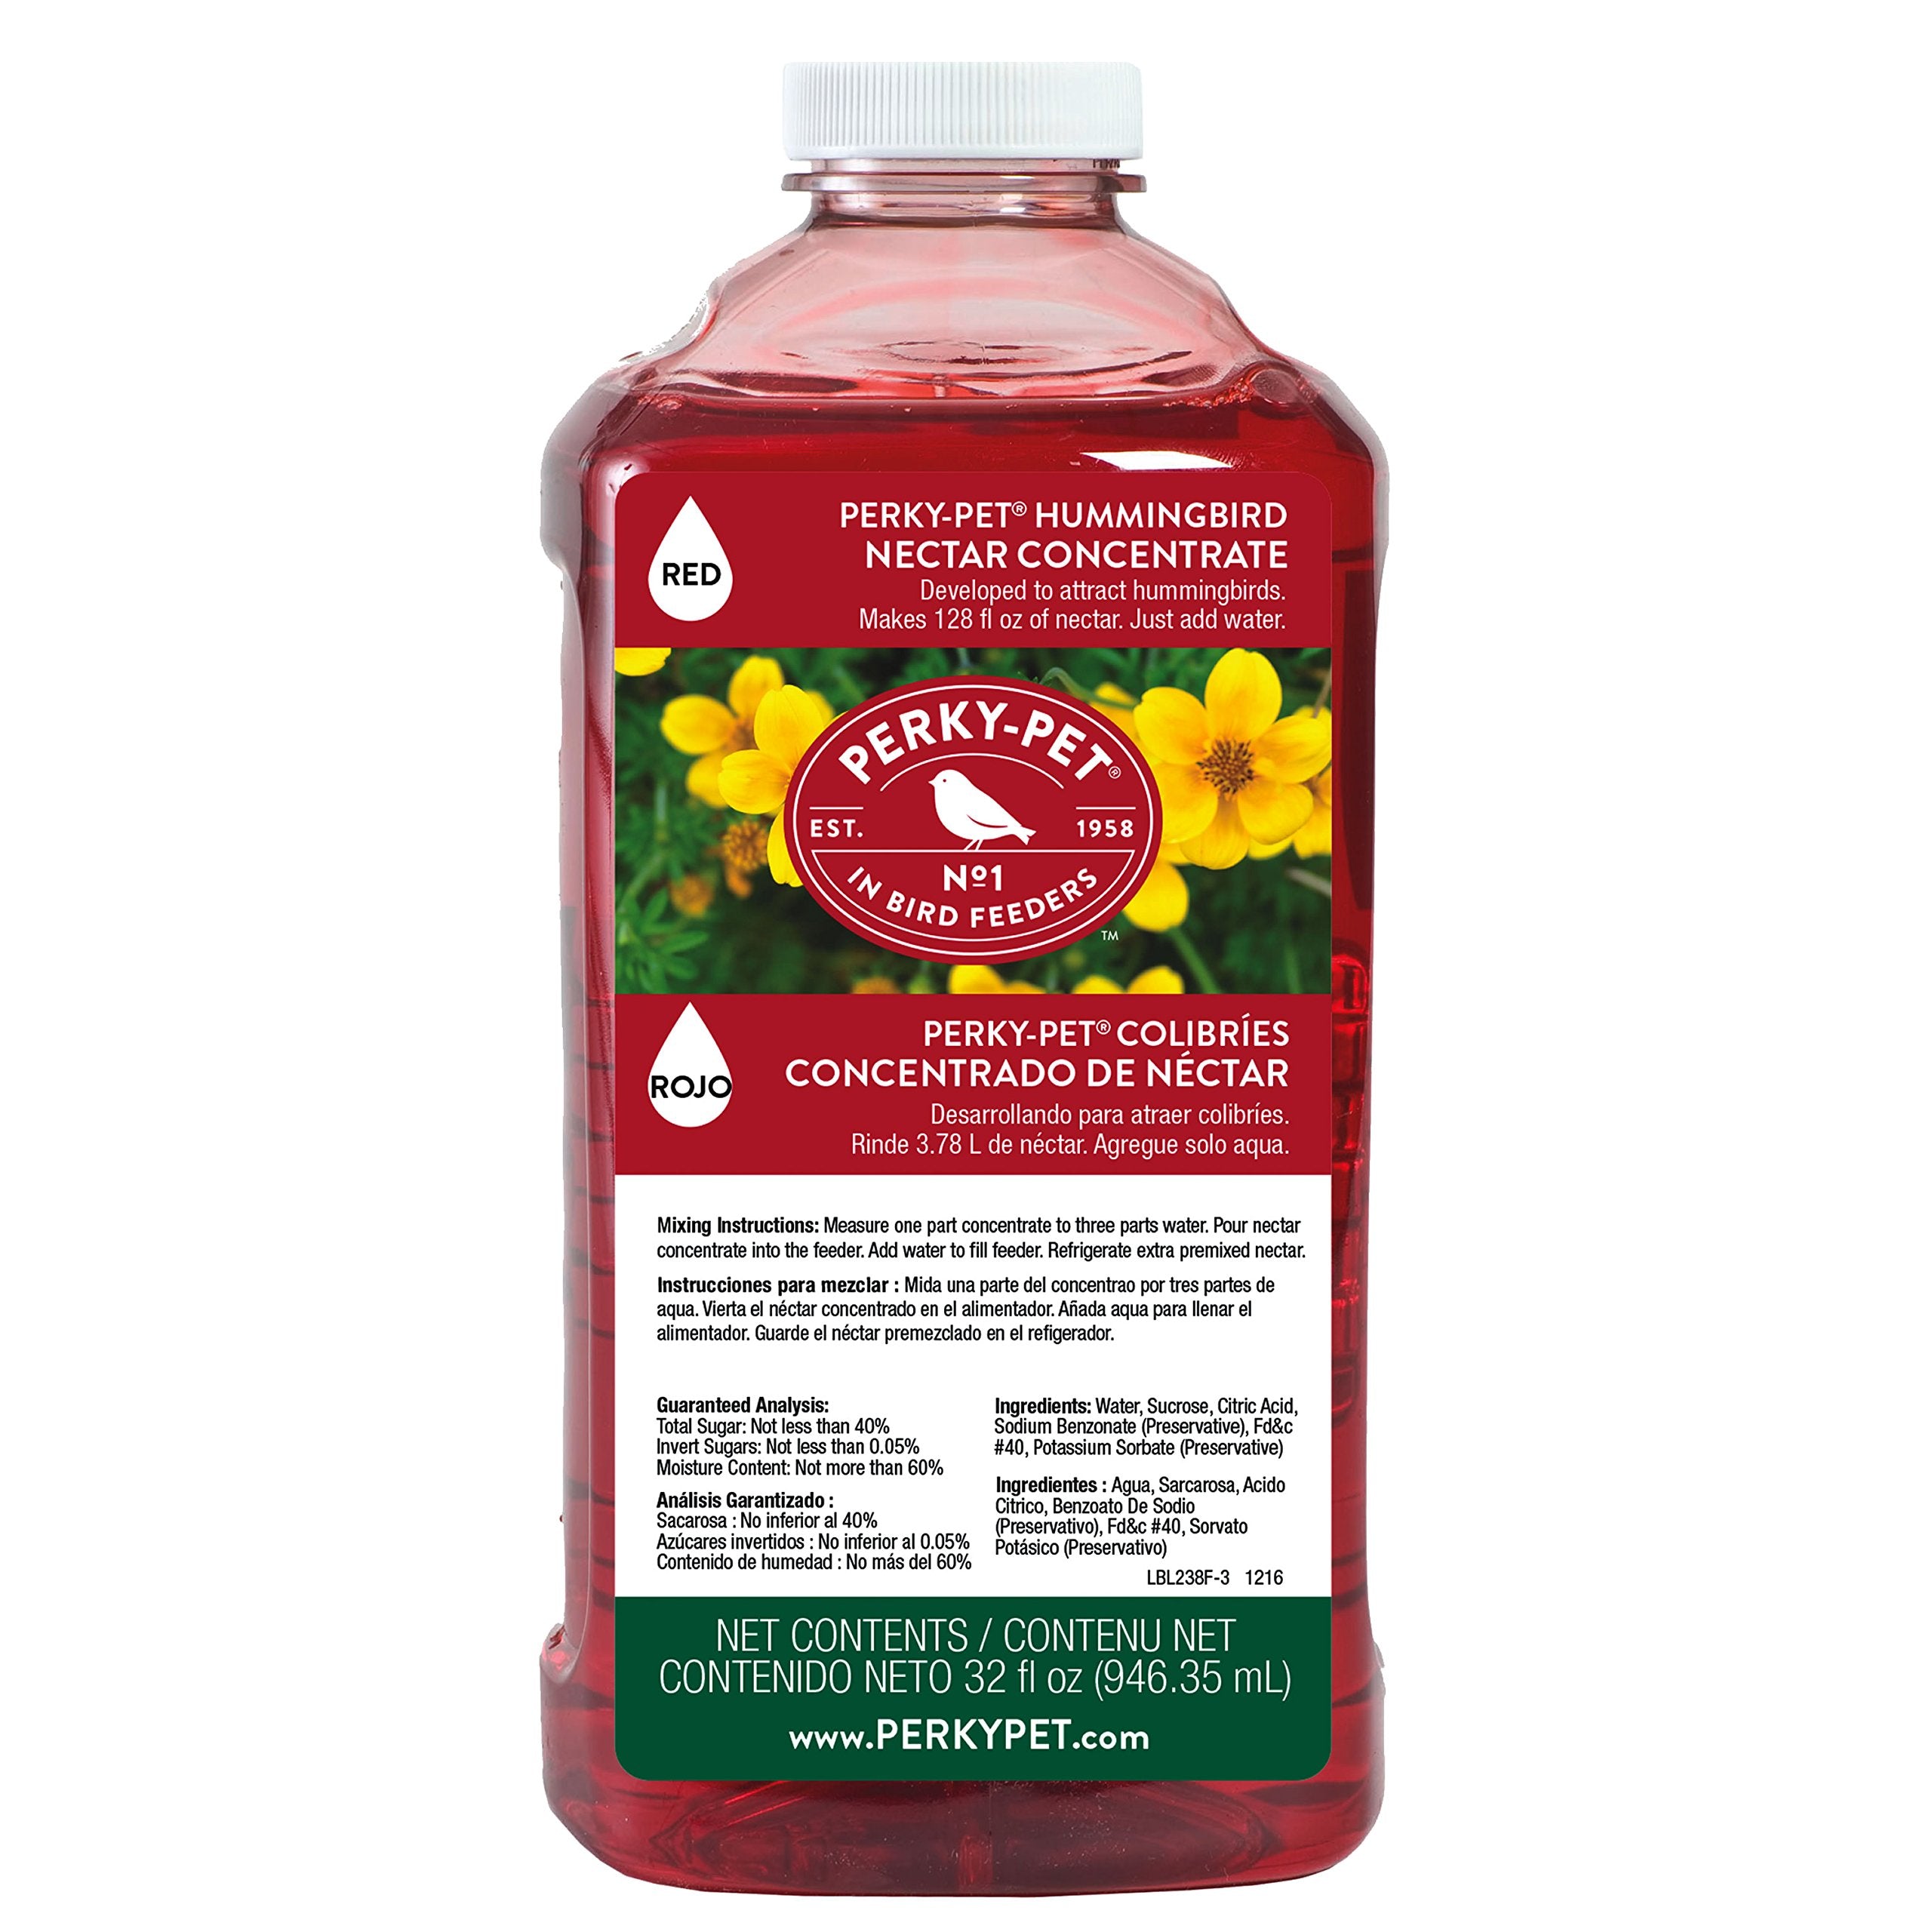 Hummingbird nectar great for Hummingbirds in early Spring and Summer months